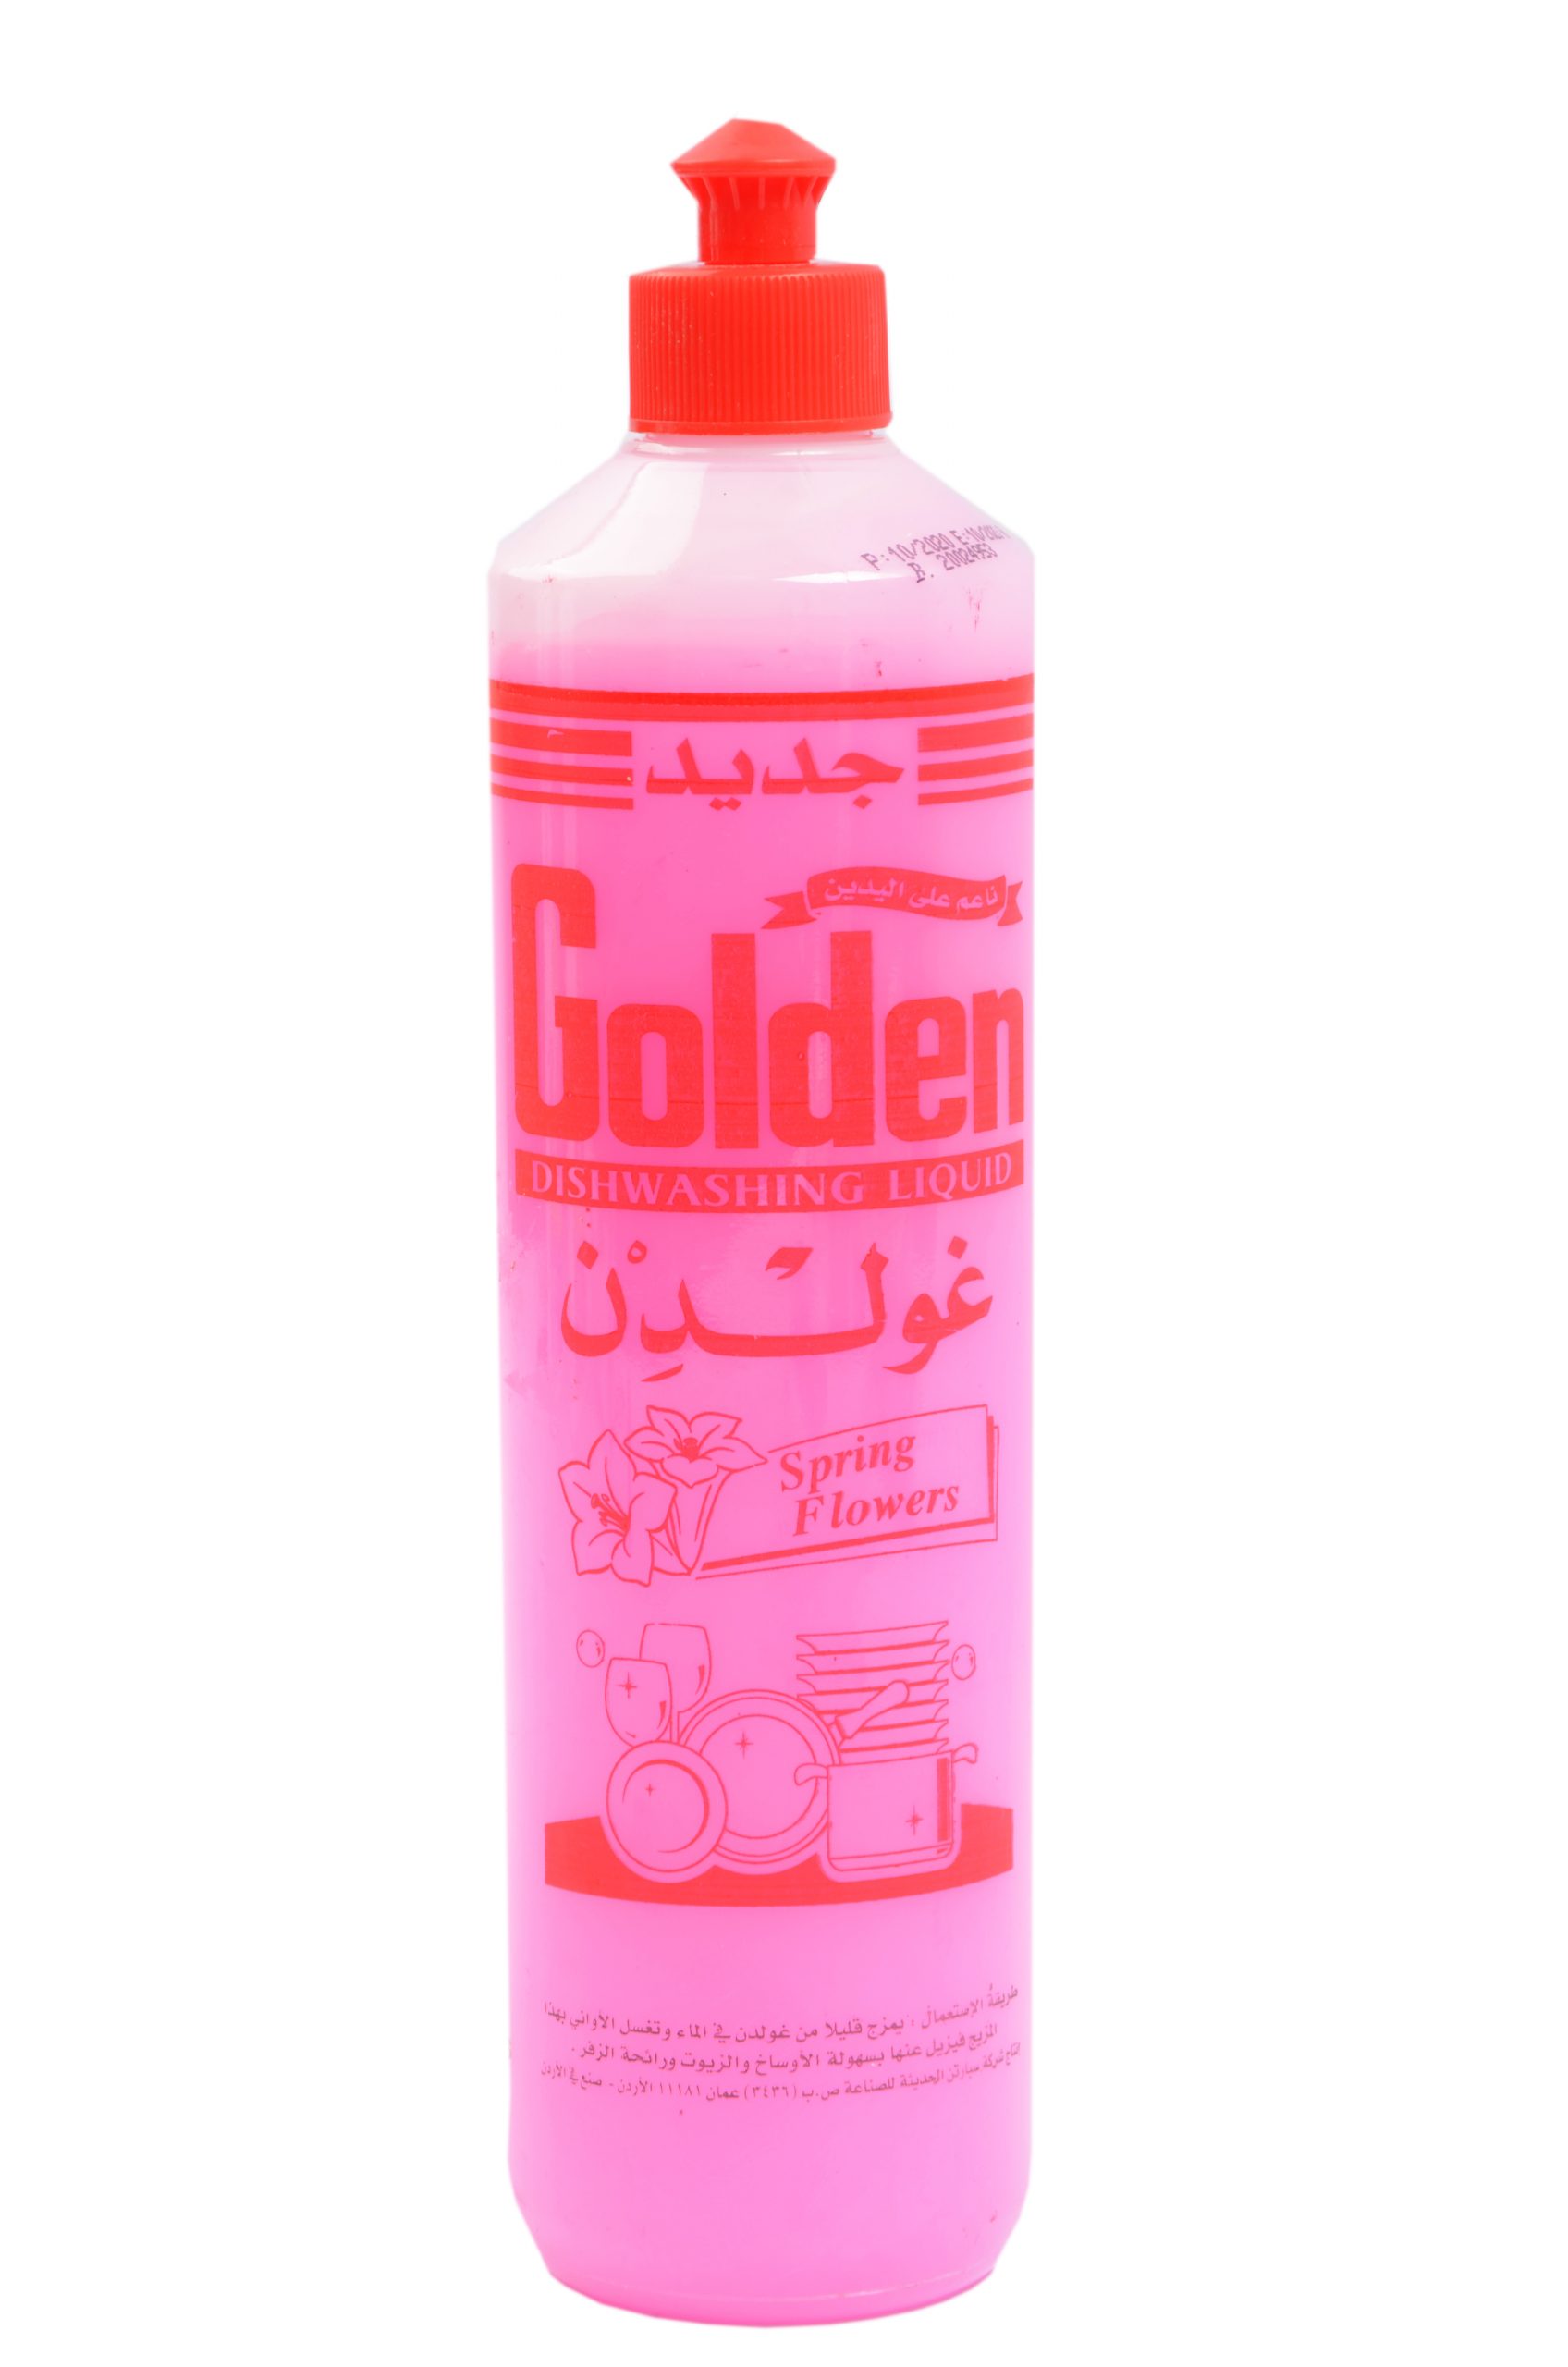 Golden 
	
	Liquid Dish Wash/1 Liter
	 |  Detergents & Cleaners |  Cleaning Materials |  House Ware